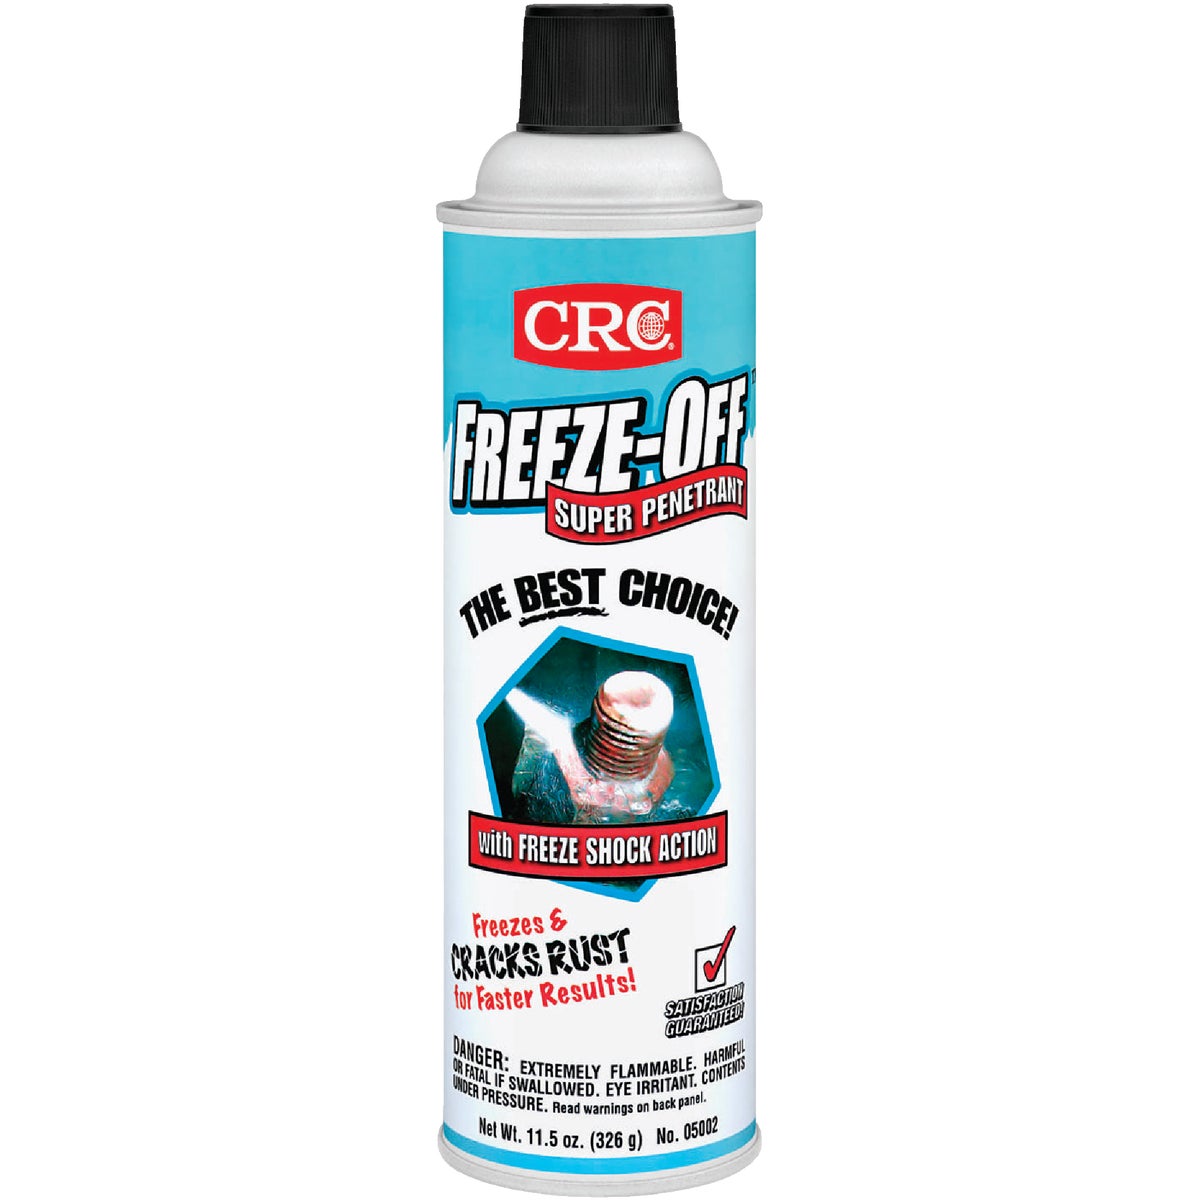 Item 574864, Freezes and cracks rust from deeper penetration and faster results.